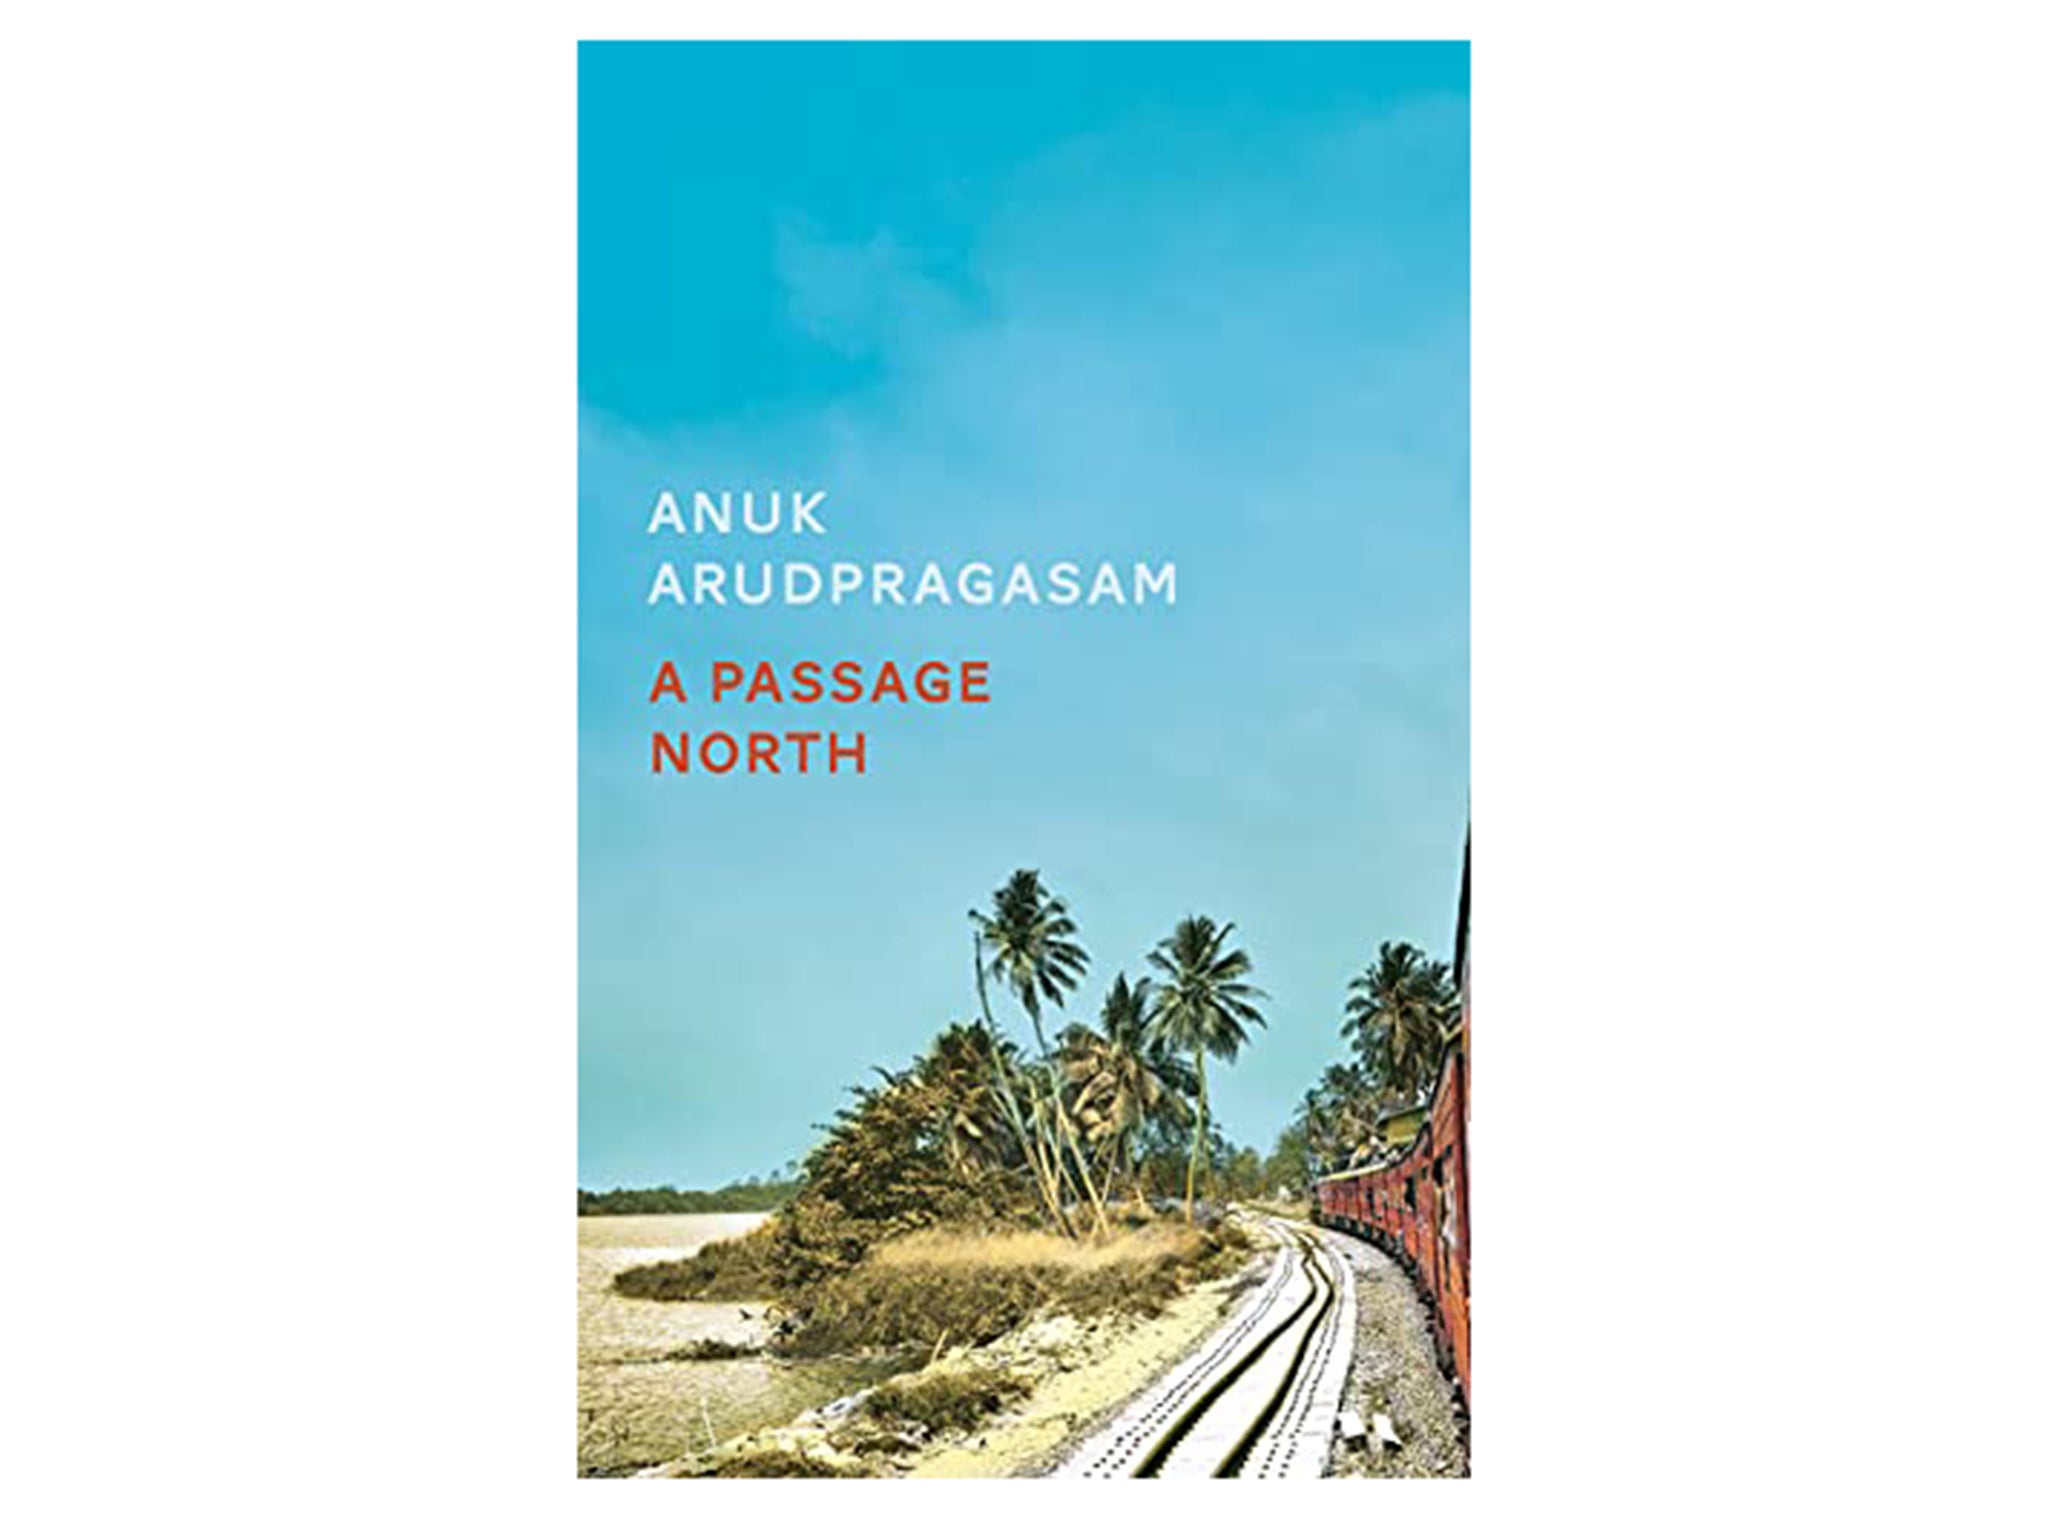 a-passage-north-by-Anuk-Arudpragasam-booker-prize-indybest-2021.jpg